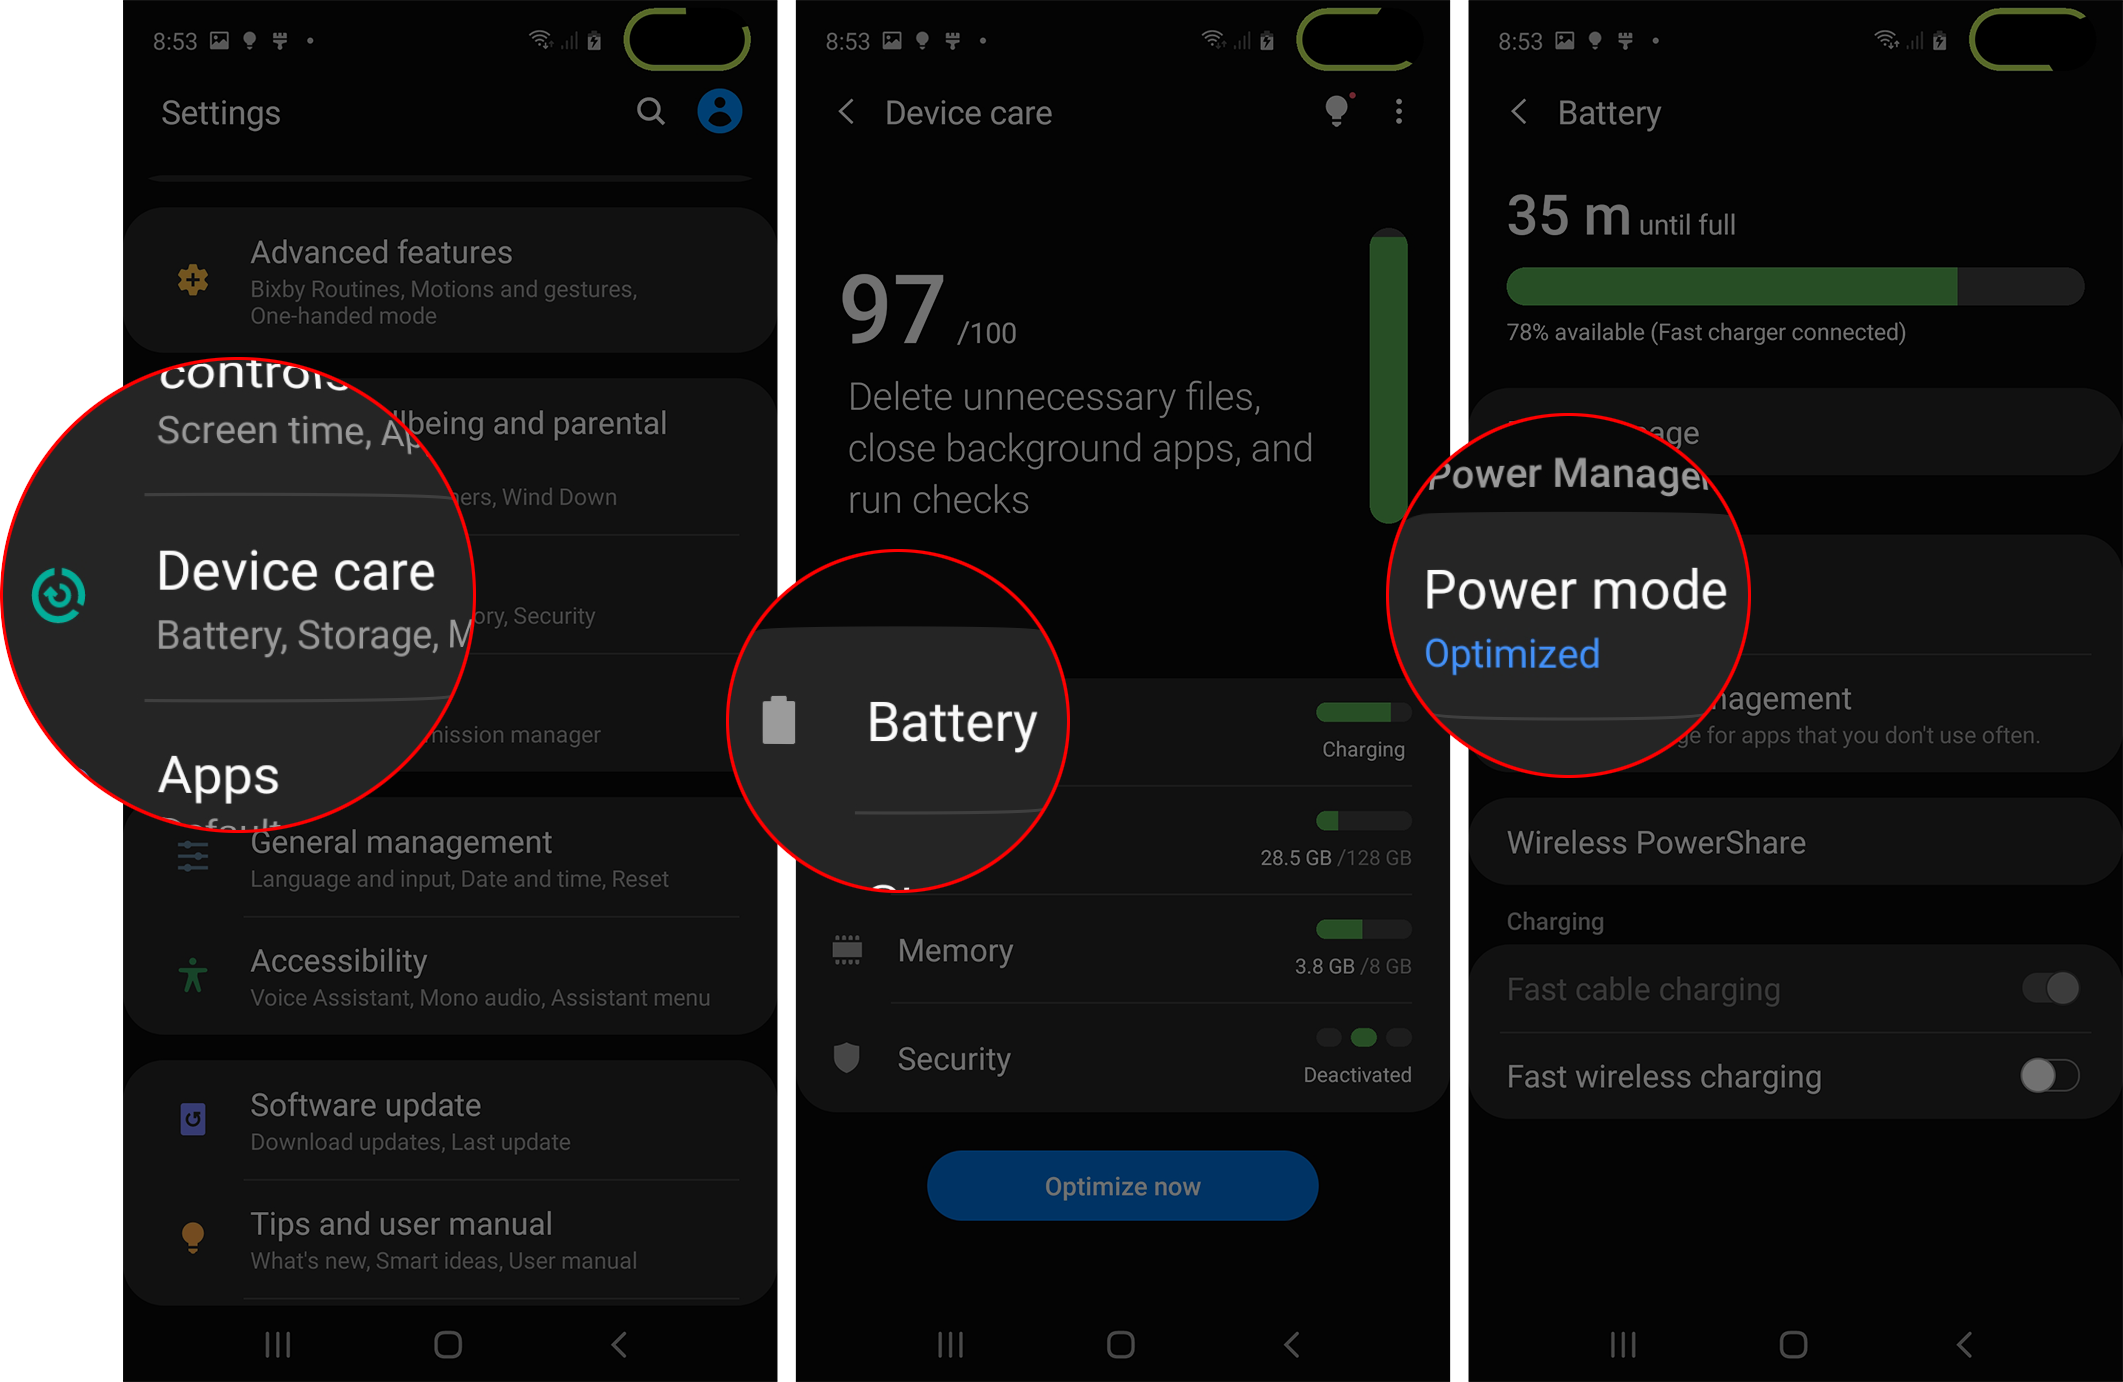 How to S10 Battery Life To Make It Last Longer